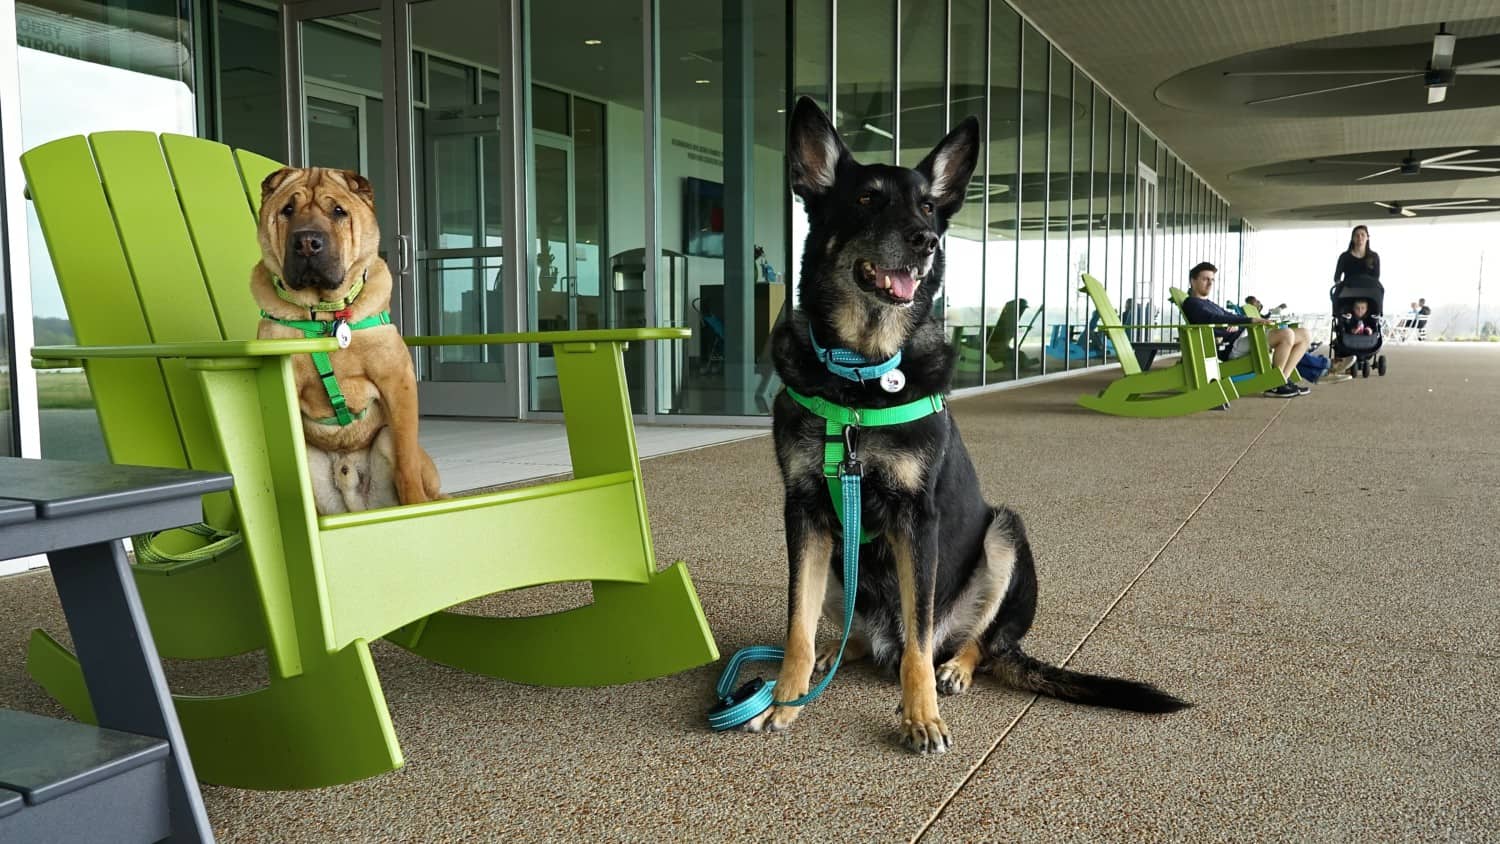 Tennessee's Top Pet Friendly Attraction: Shelby Farms Park